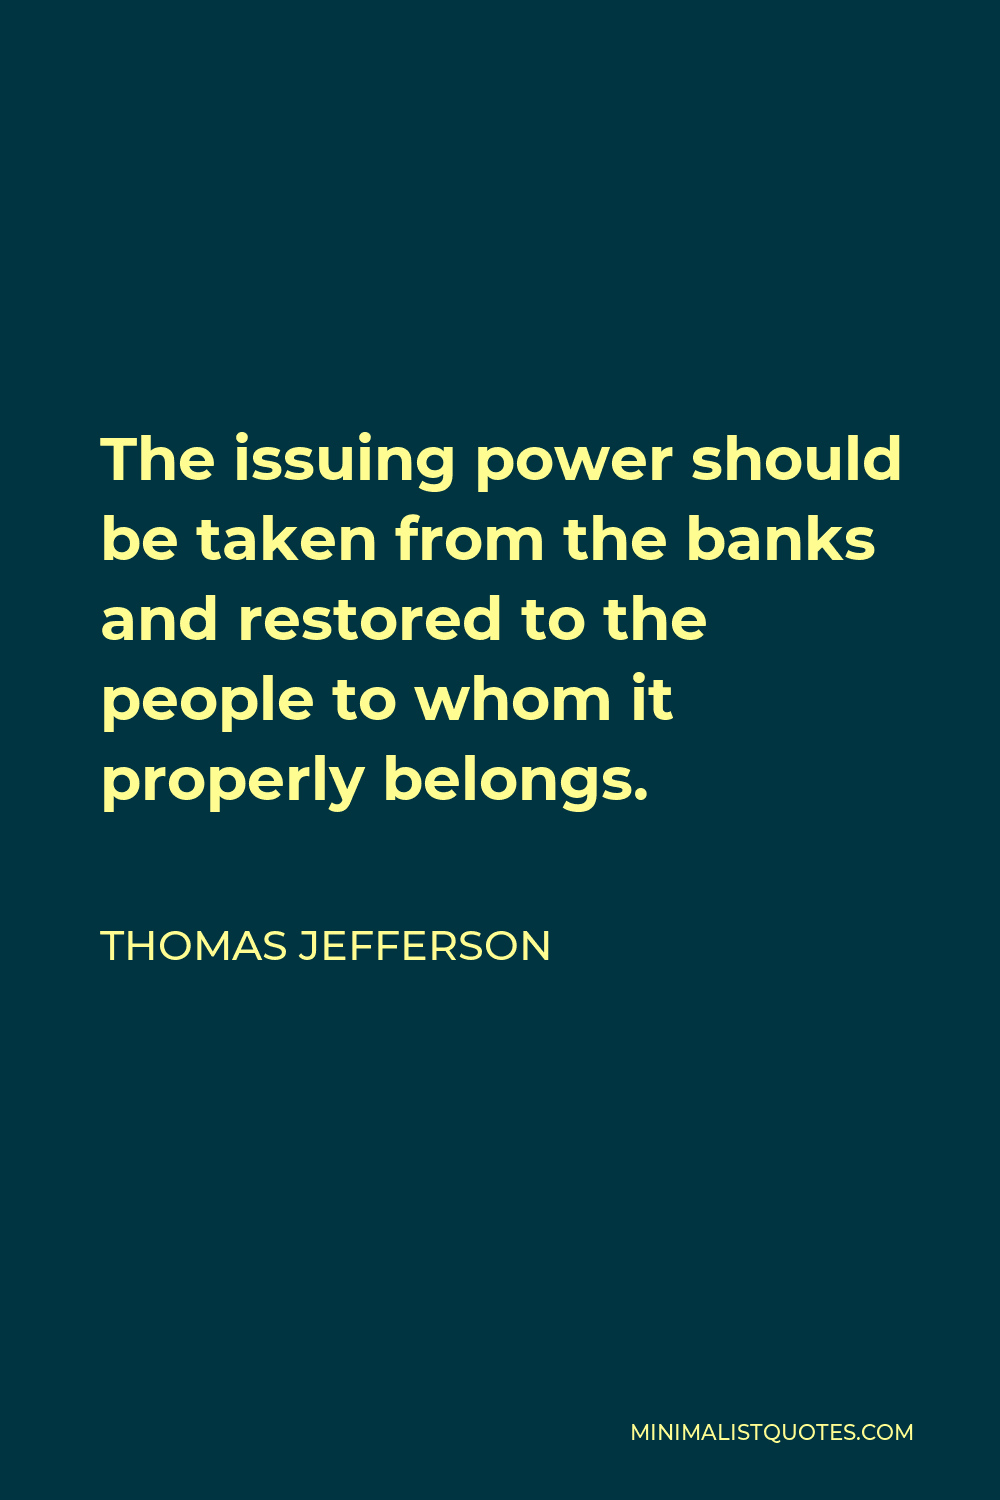 Thomas Jefferson Quote - The issuing power should be taken from the banks and restored to the people to whom it properly belongs.